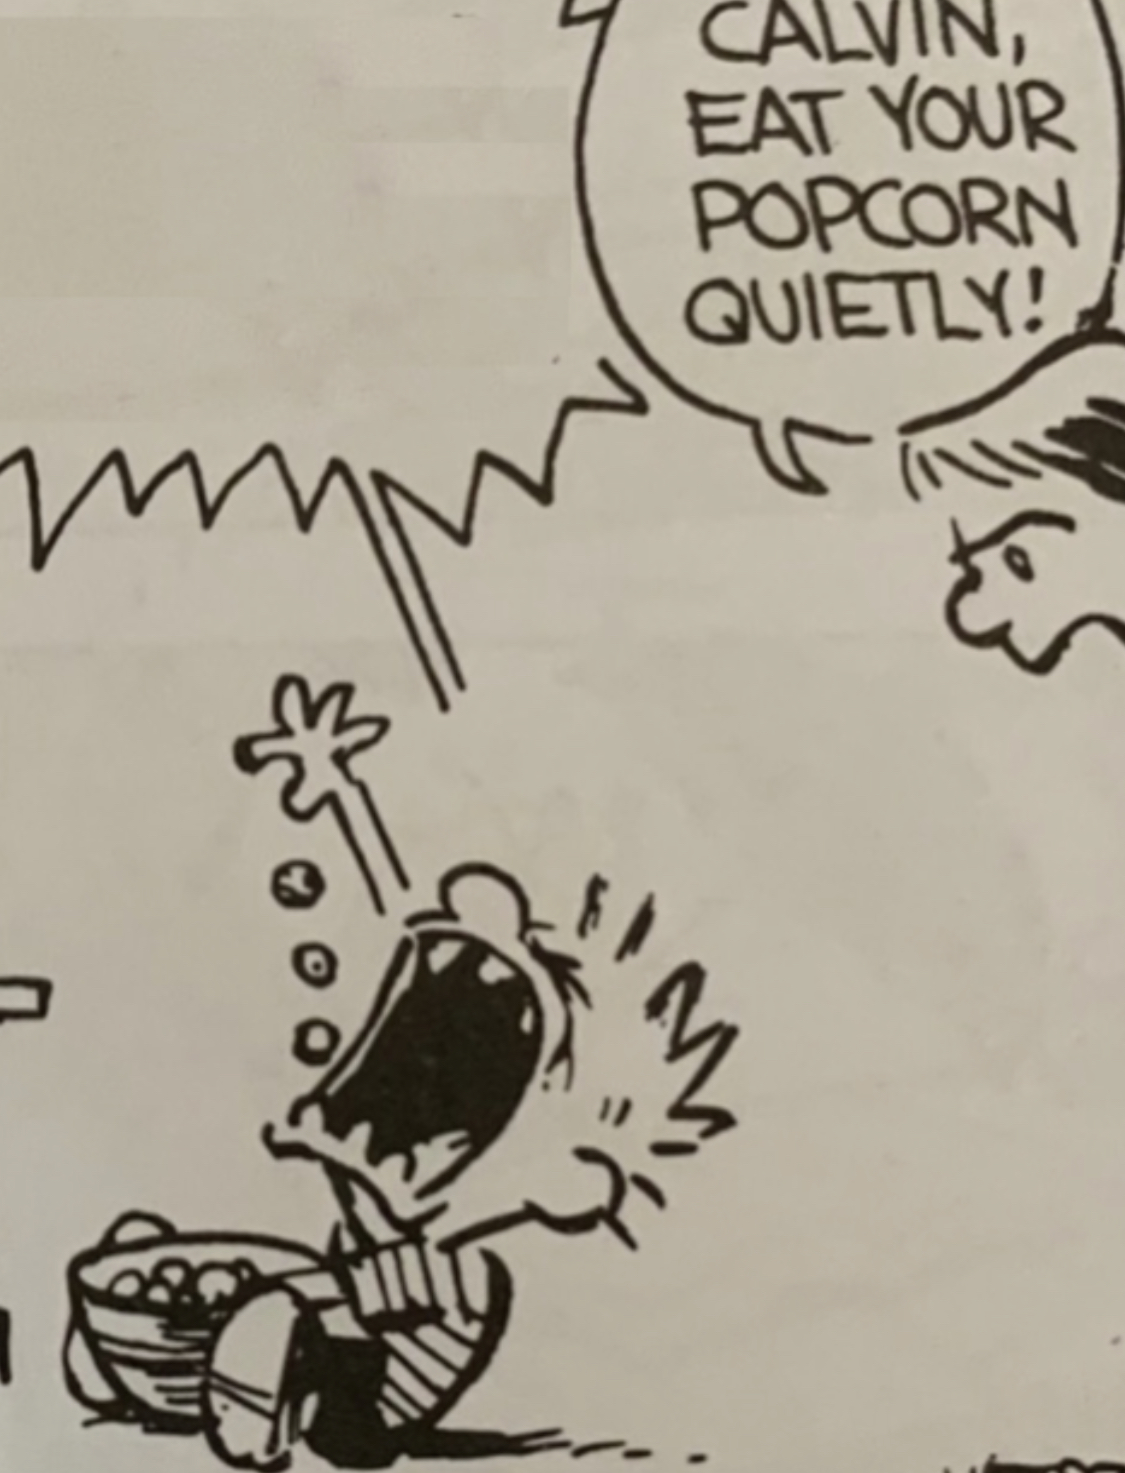 High Quality Calvin eat your popcorn quietly Blank Meme Template